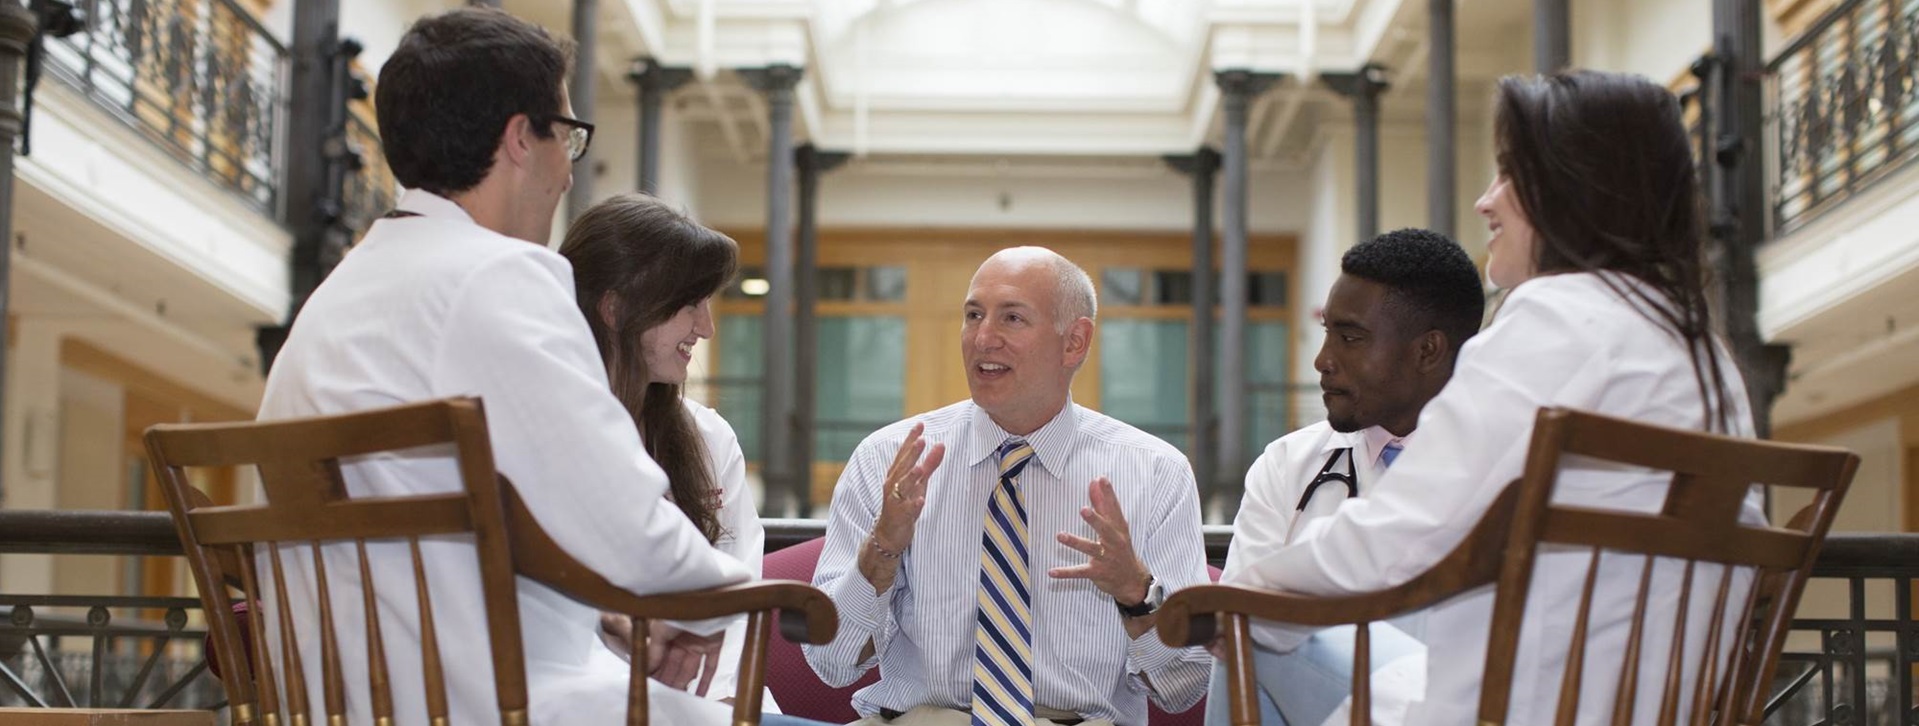 Man teaching group of doctors in white coats